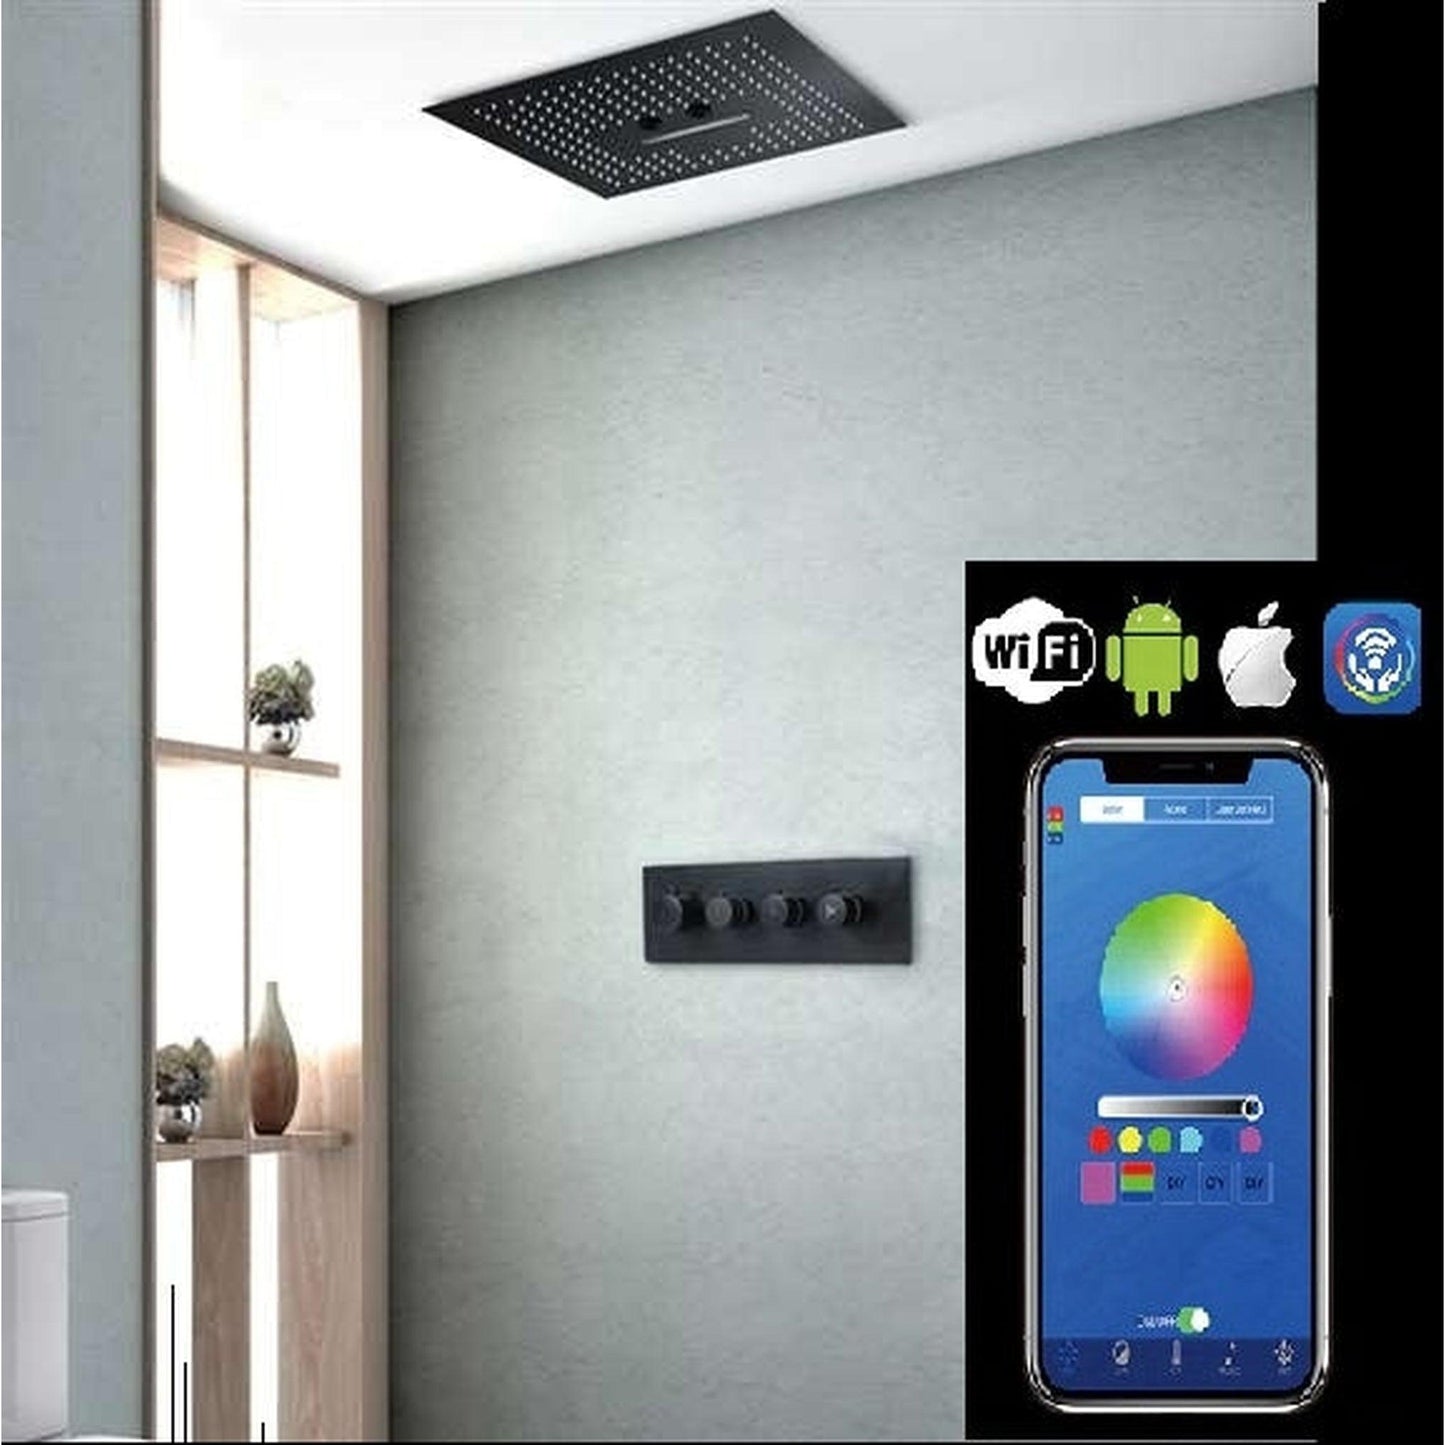 Fontana Geneva Matte Black Stainless Steel Ceiling Mounted Phone Controlled Smart LED Rainfall Waterfall Shower System